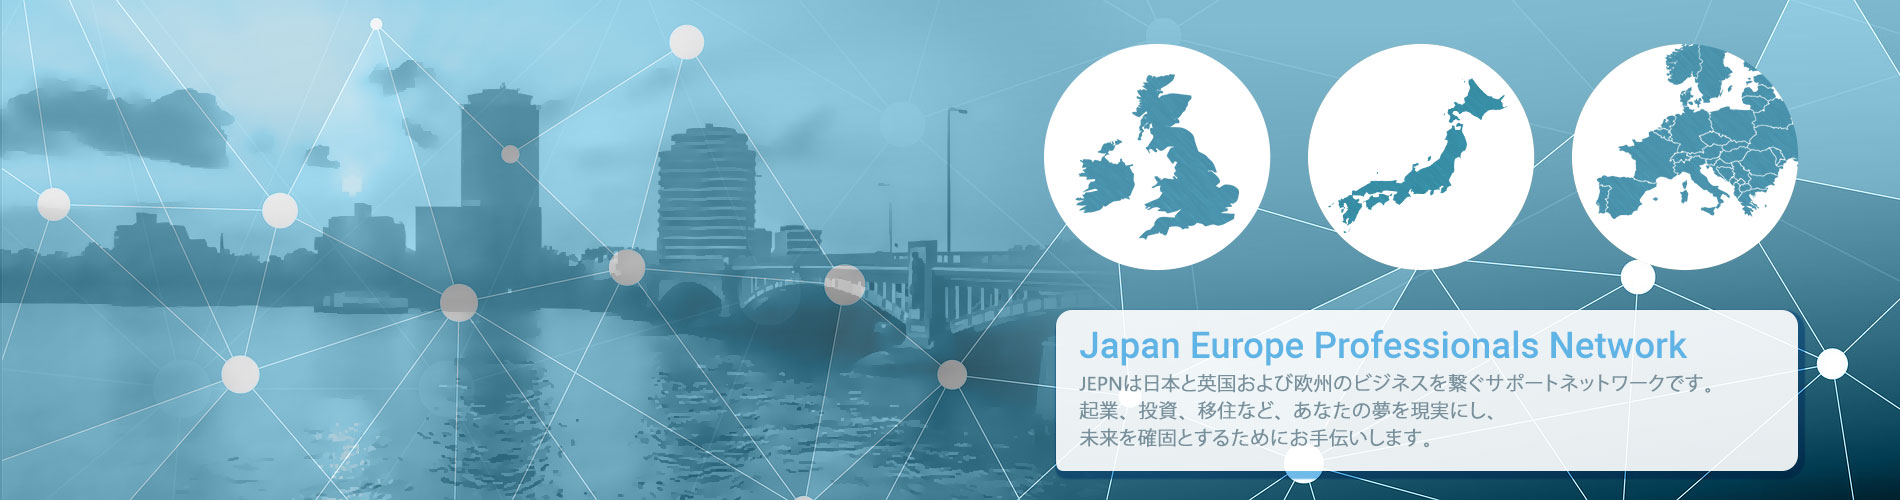 Japan Europe Professionals Network